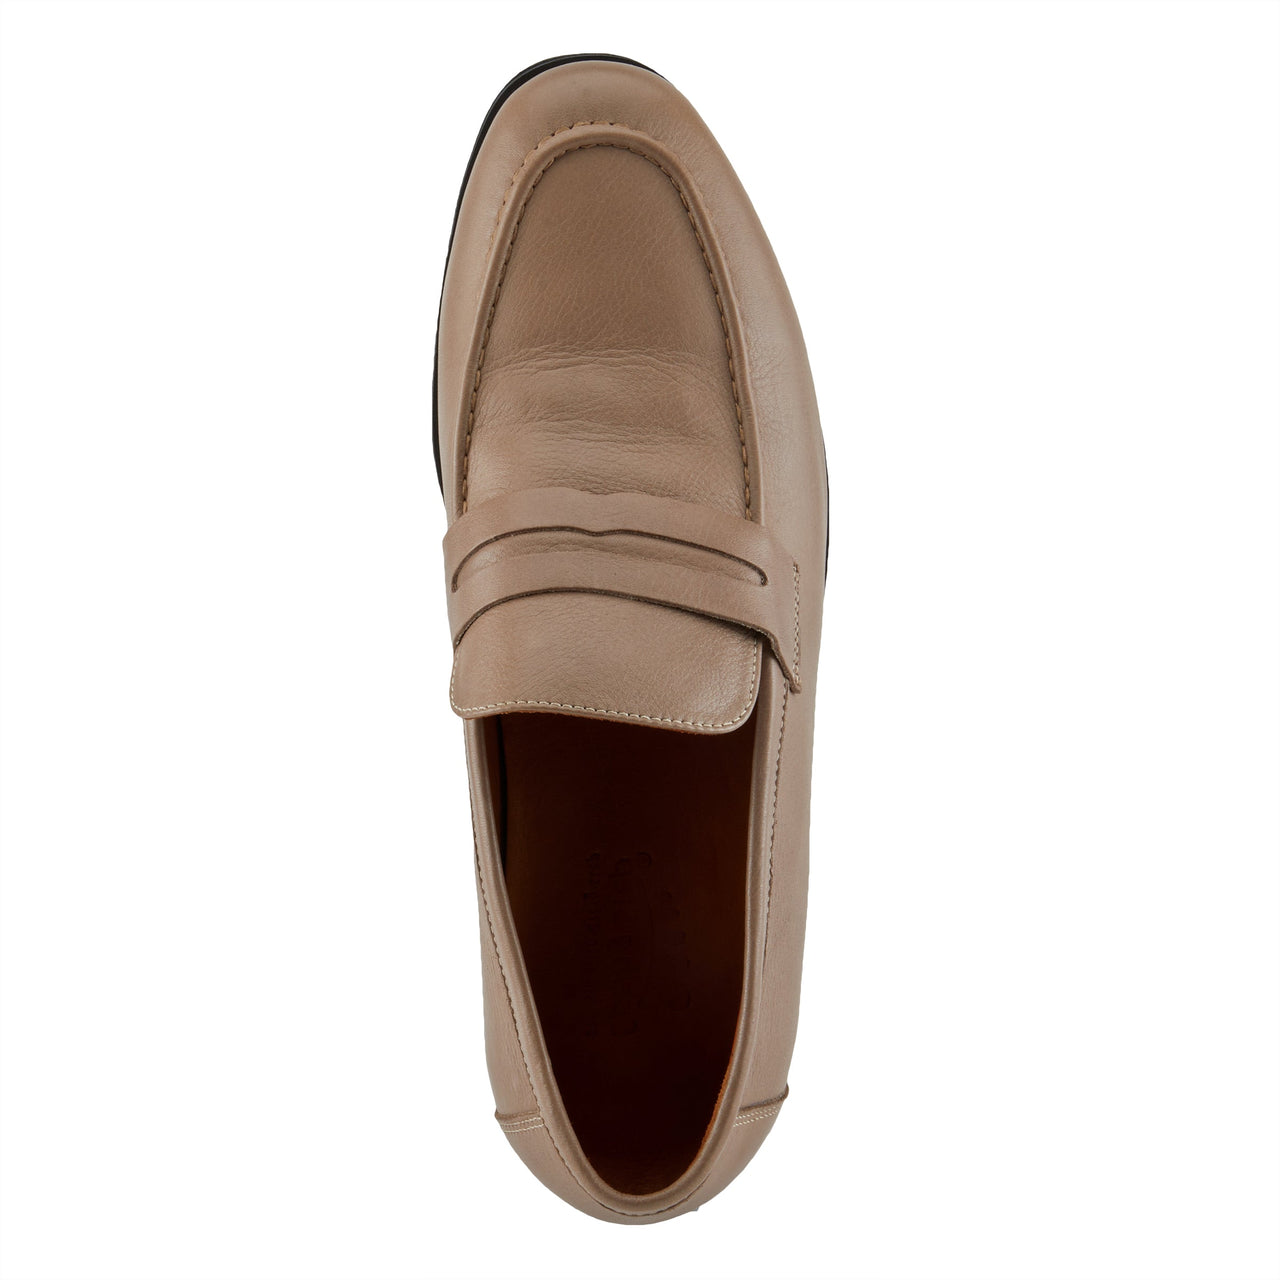 
Spring Step Men Paul Shoes sleek and modern design for a polished look